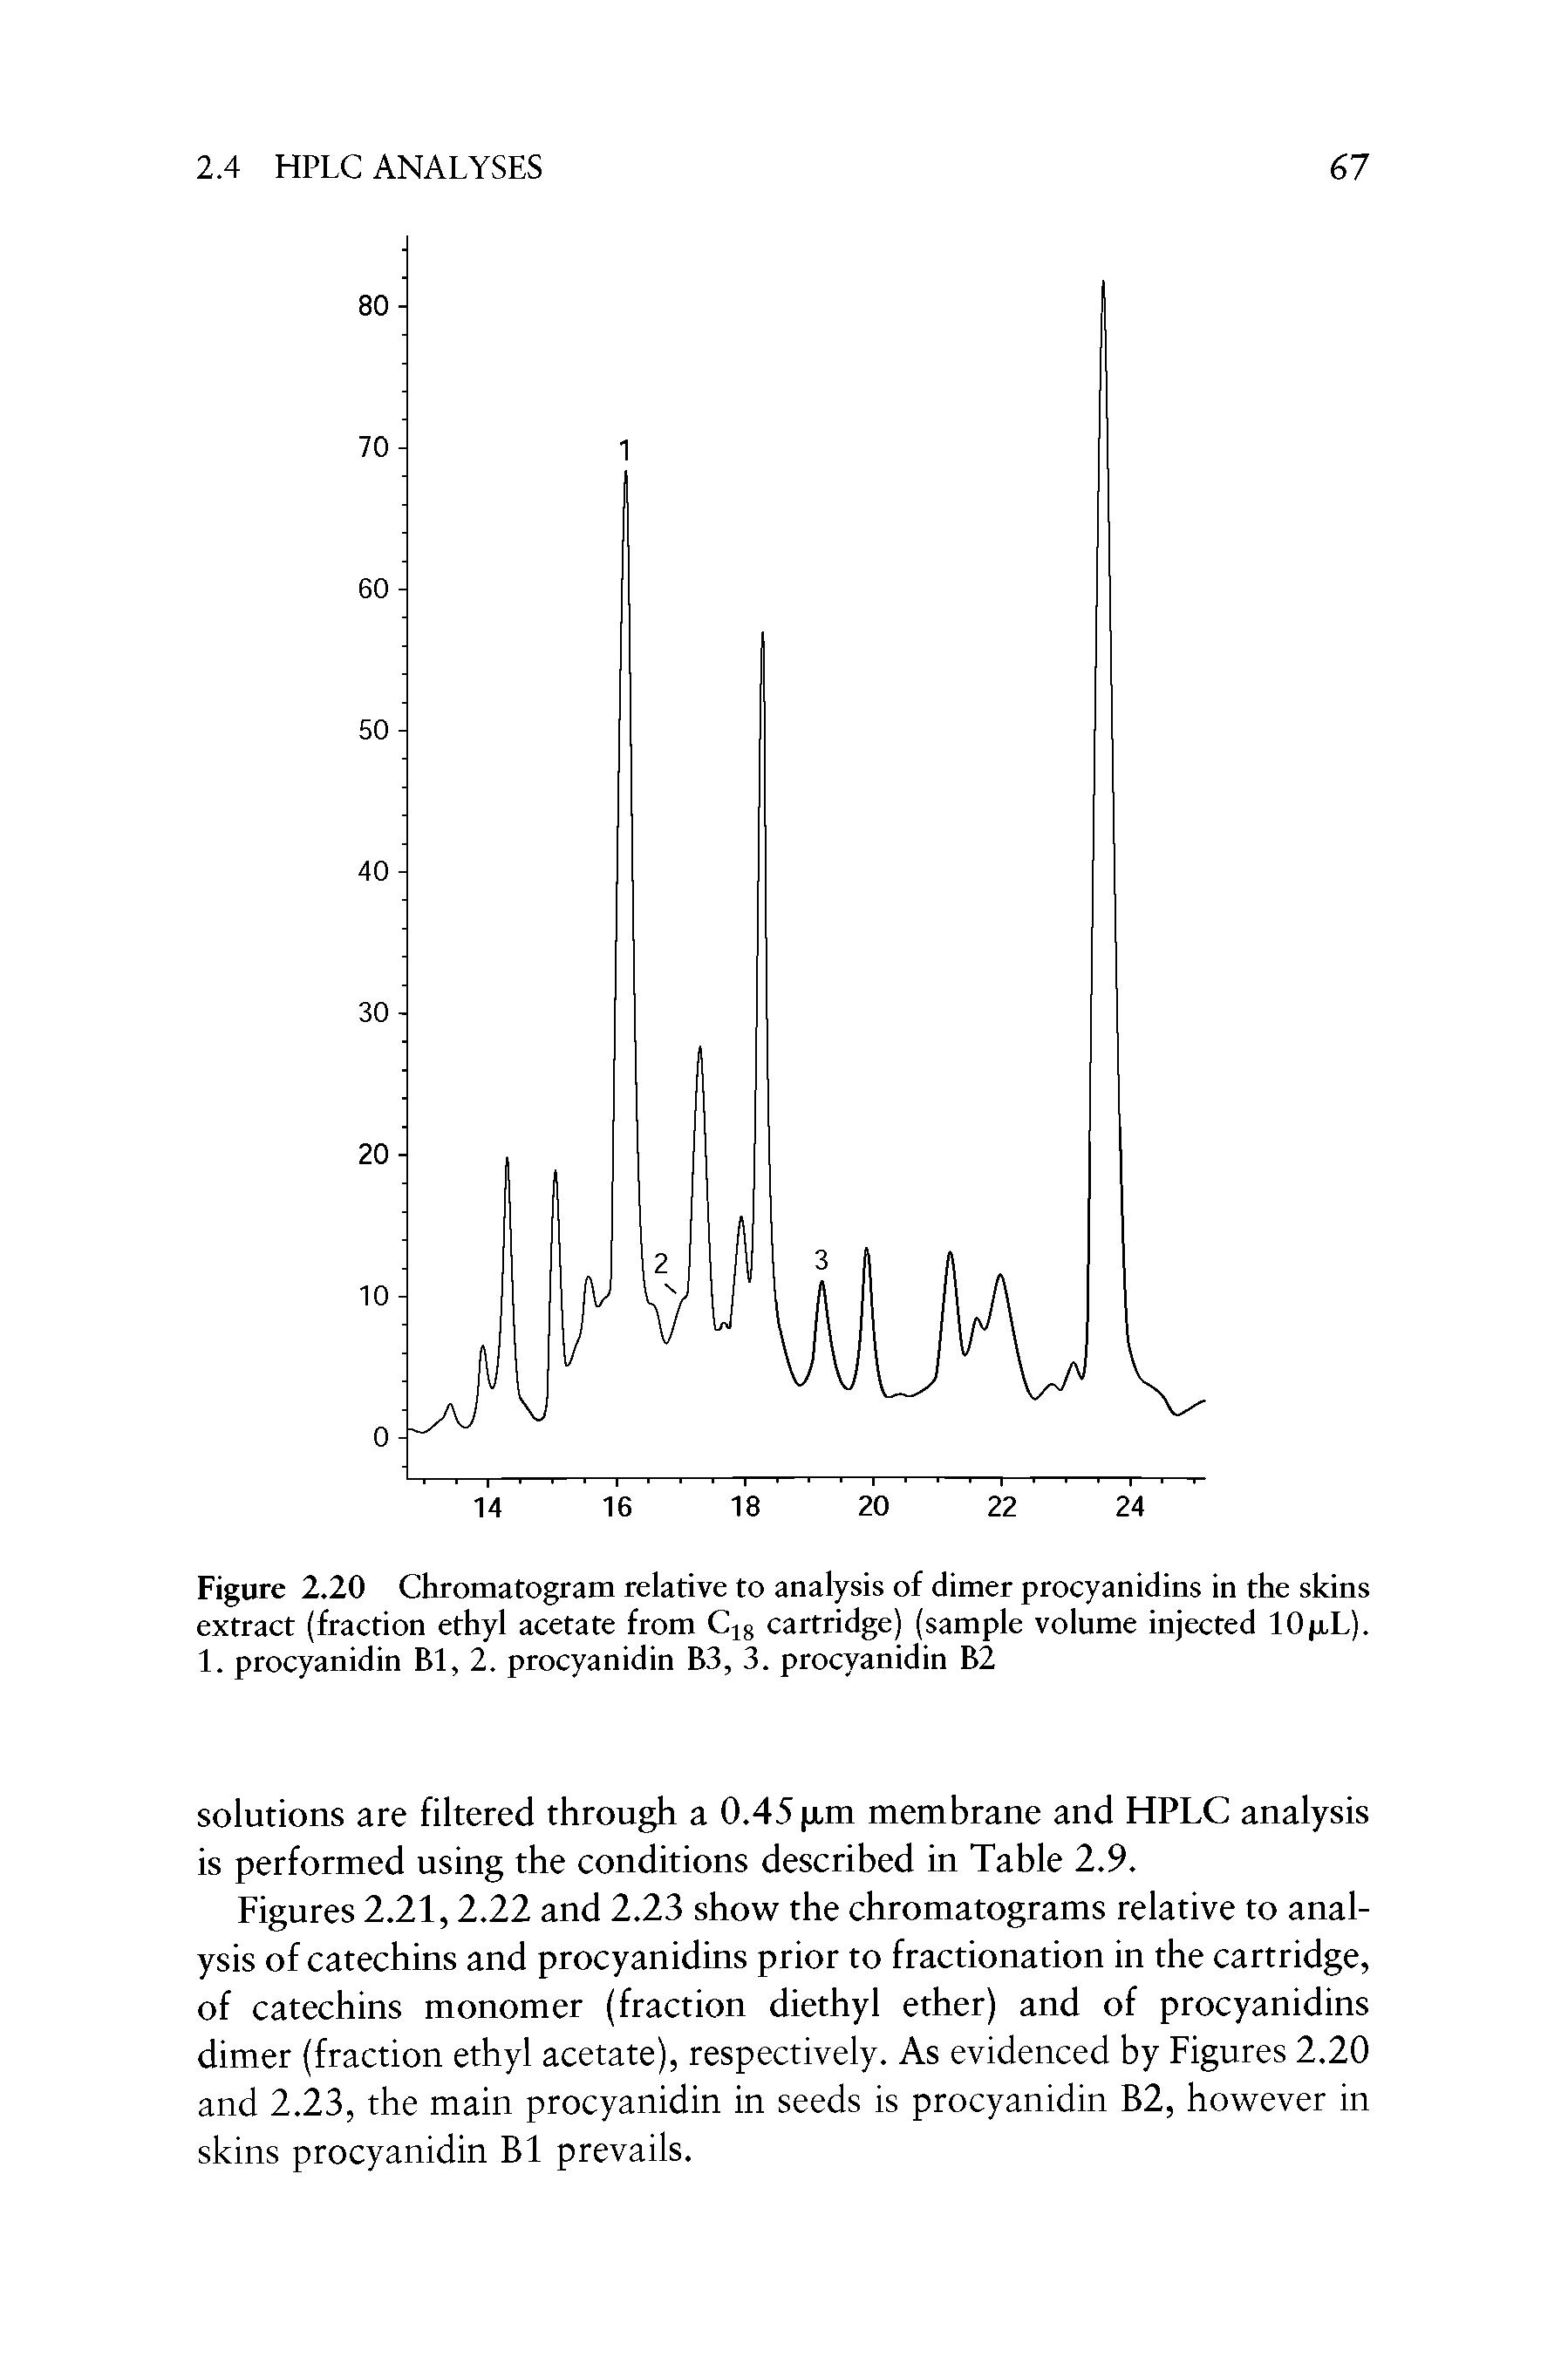 Figures 2.21,2.22 and 2.23 show the chromatograms relative to analysis of catechins and procyanidins prior to fractionation in the cartridge, of catechins monomer (fraction diethyl ether) and of procyanidins dimer (fraction ethyl acetate), respectively. As evidenced by Figures 2.20 and 2.23, the main procyanidin in seeds is procyanidin B2, however in skins procyanidin Bl prevails.